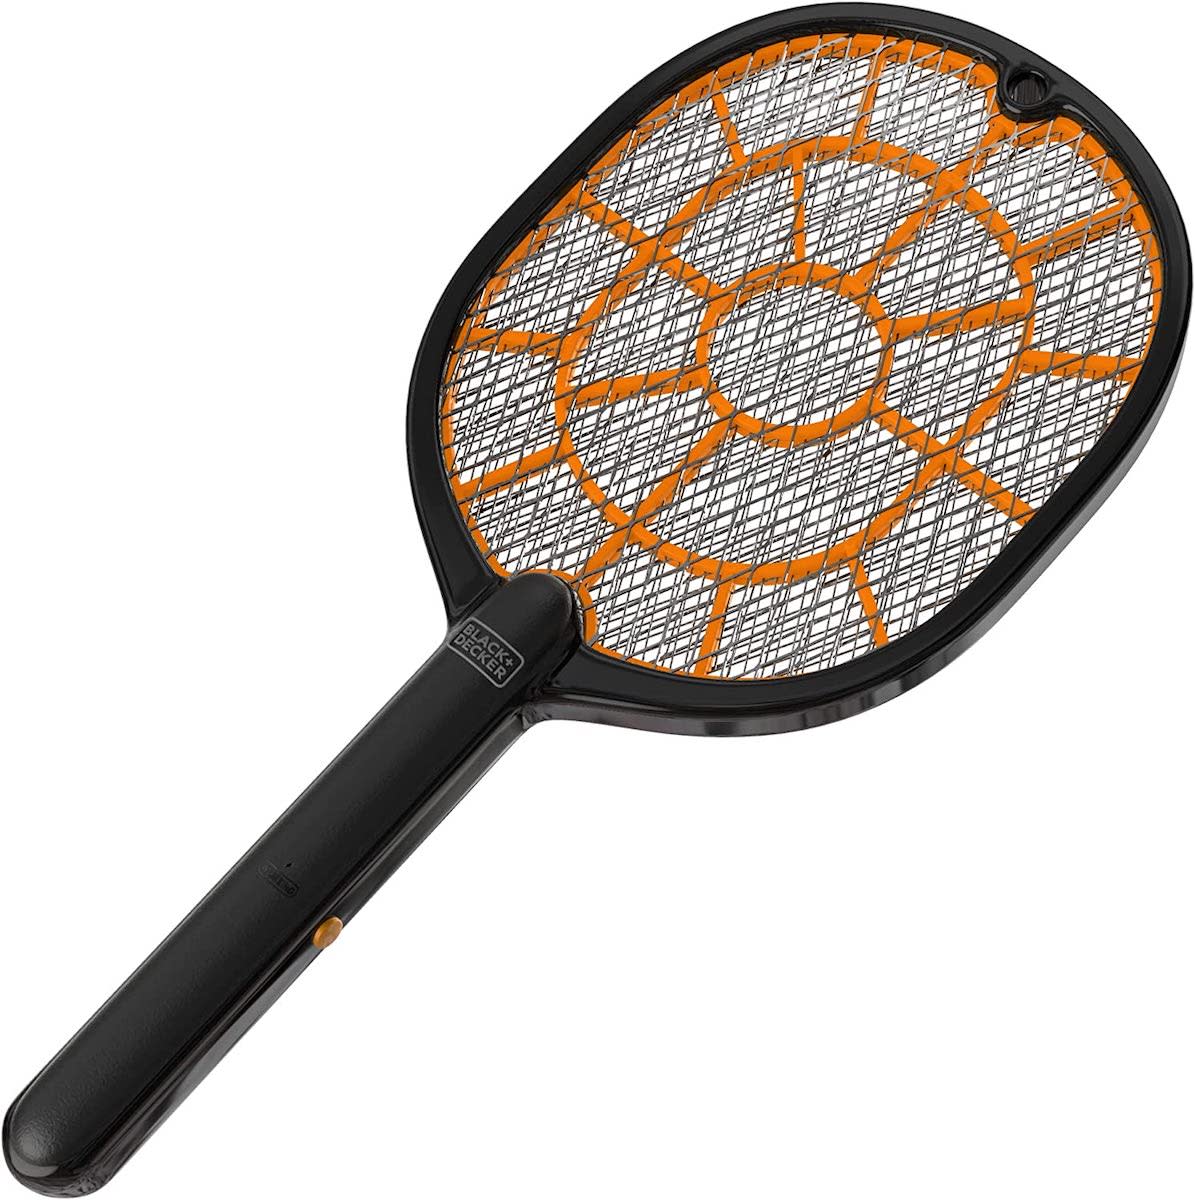 https://cdn.apartmenttherapy.info/image/upload/v1655385007/at/product%20listing/Black_Decker_Electric_Fly_Swatter.jpg